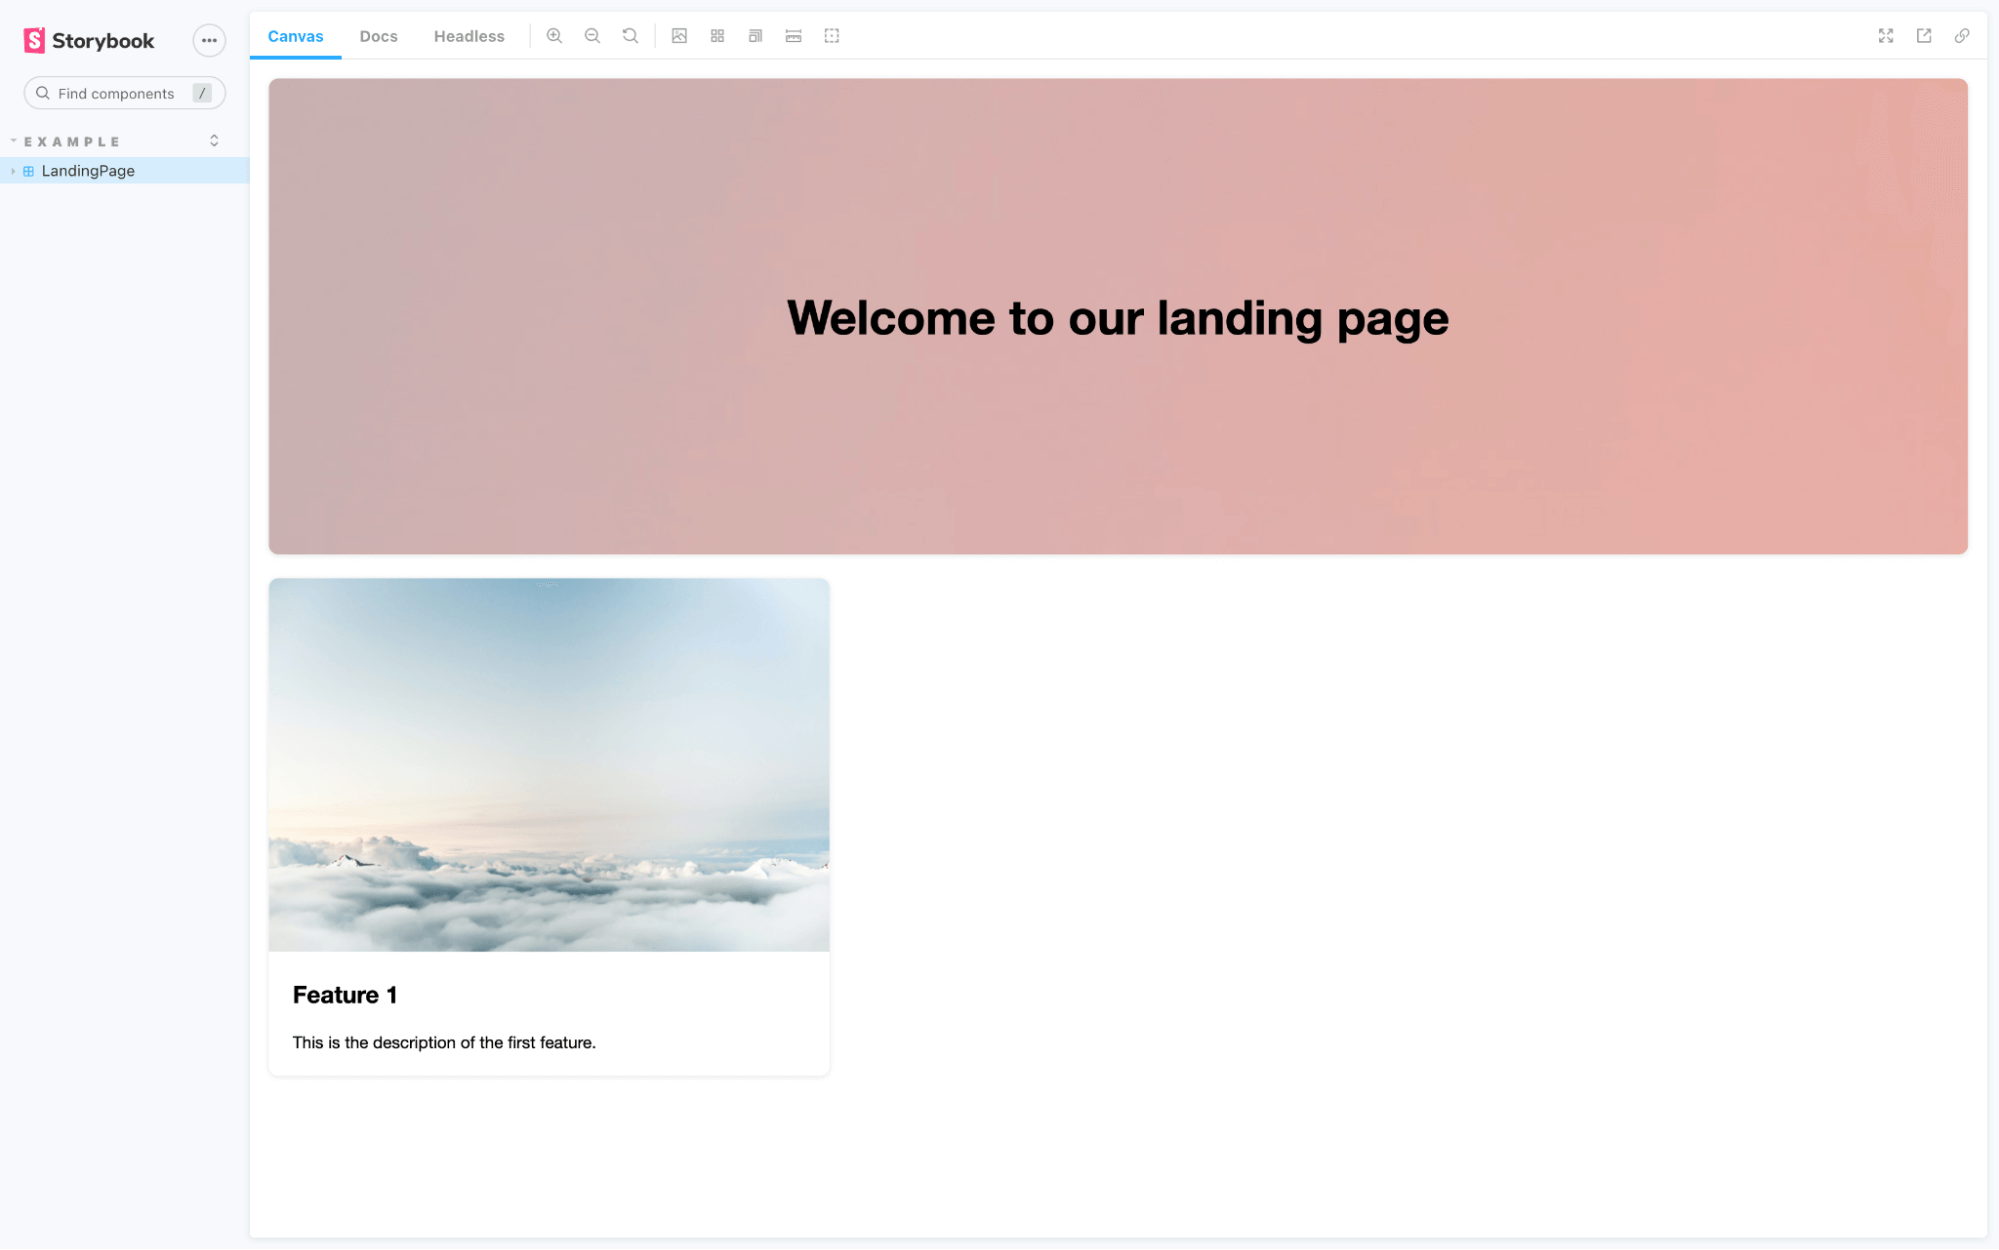 Rendered landing page in Storybook interface